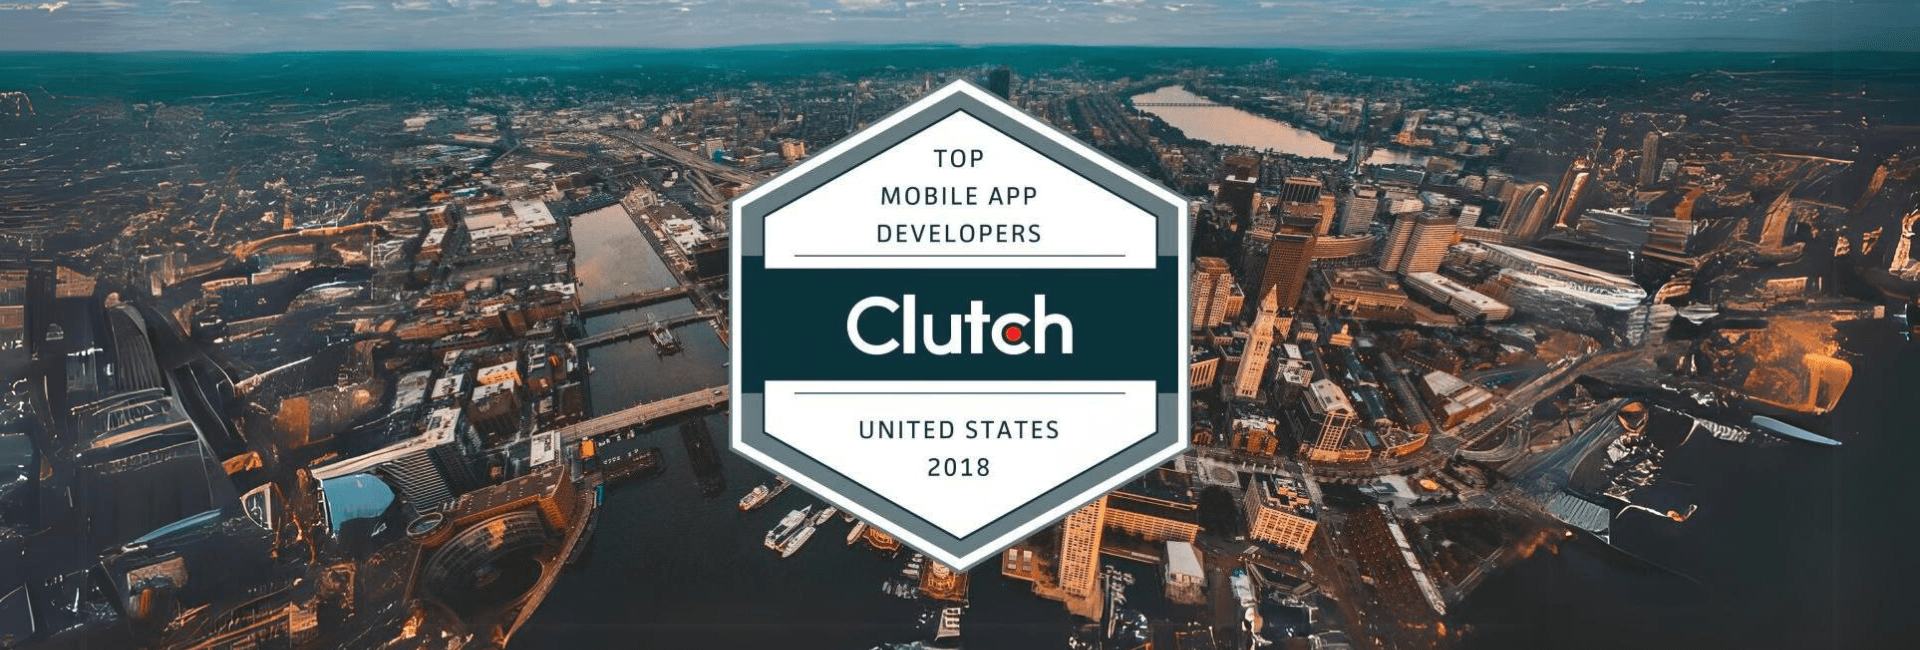 Clutch Badge of Top Mobile App Developers in United States